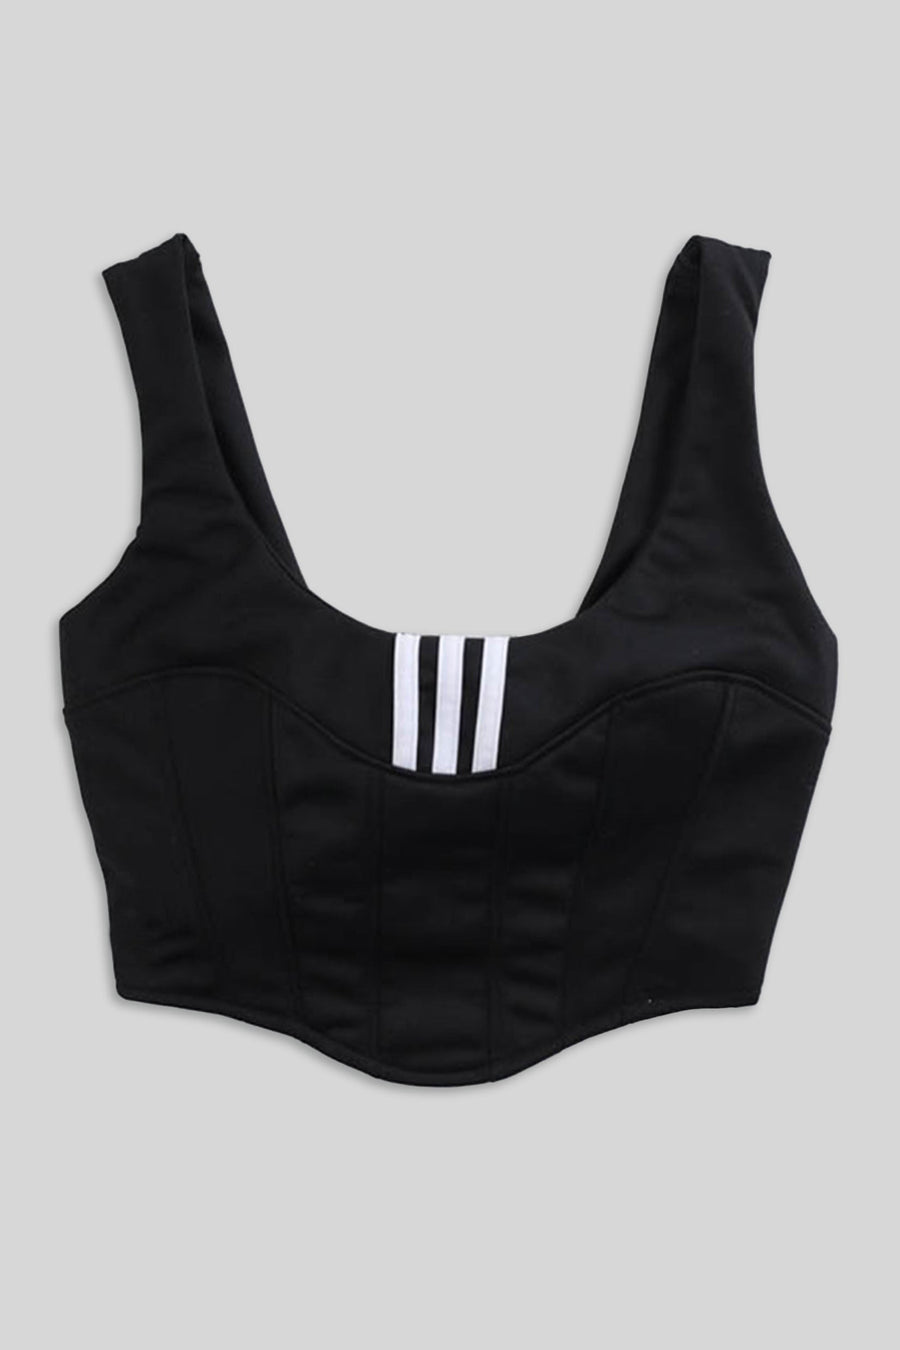 Rework Adidas Track Bustier - XS, S, M, L – Frankie Collective